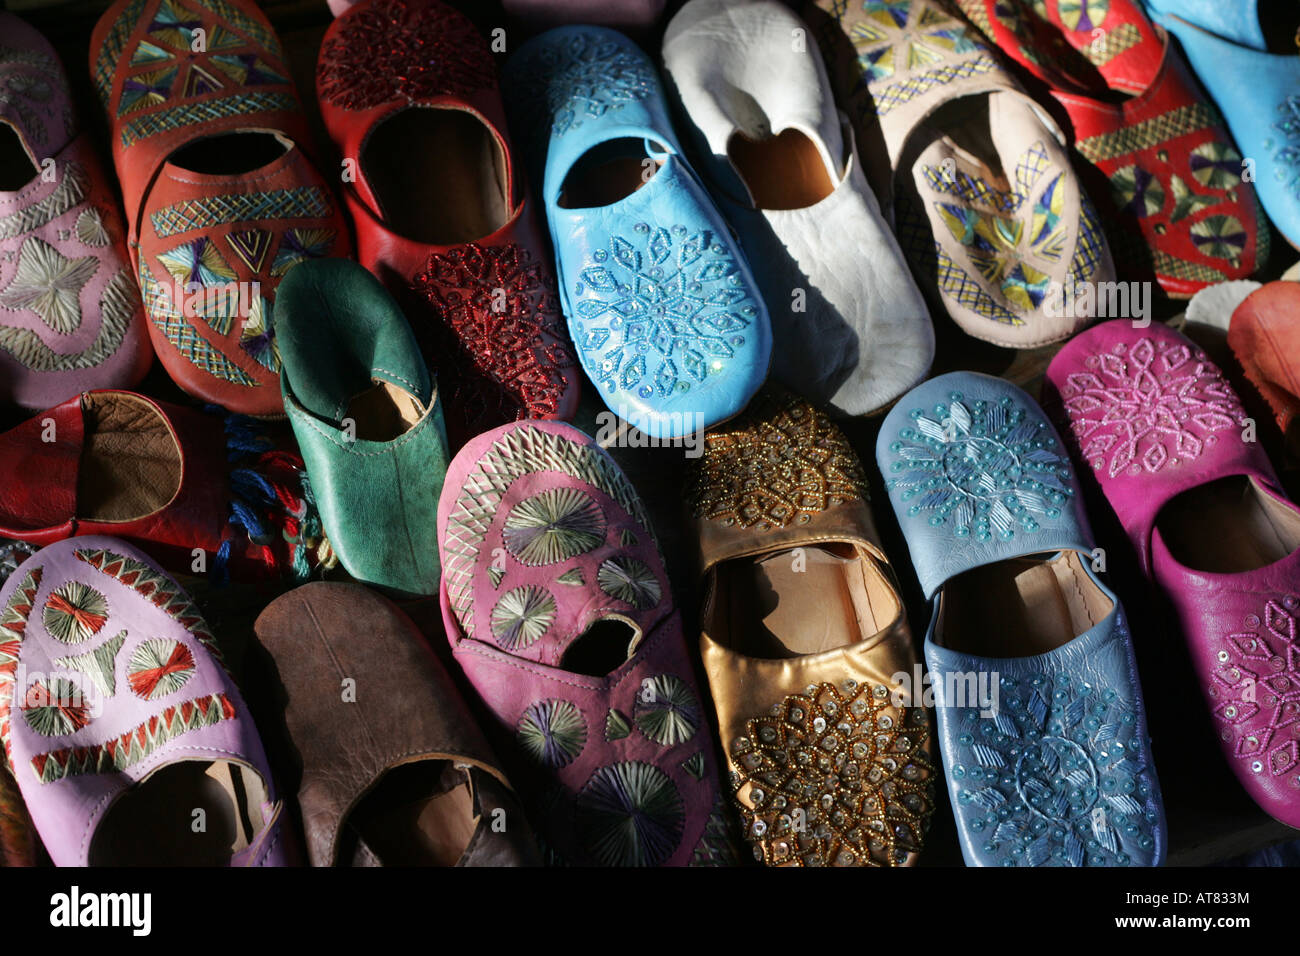 Moroccan slippers for sale at a stall in a souq, Central Medina, Marrakech, Morocco. Stock Photo